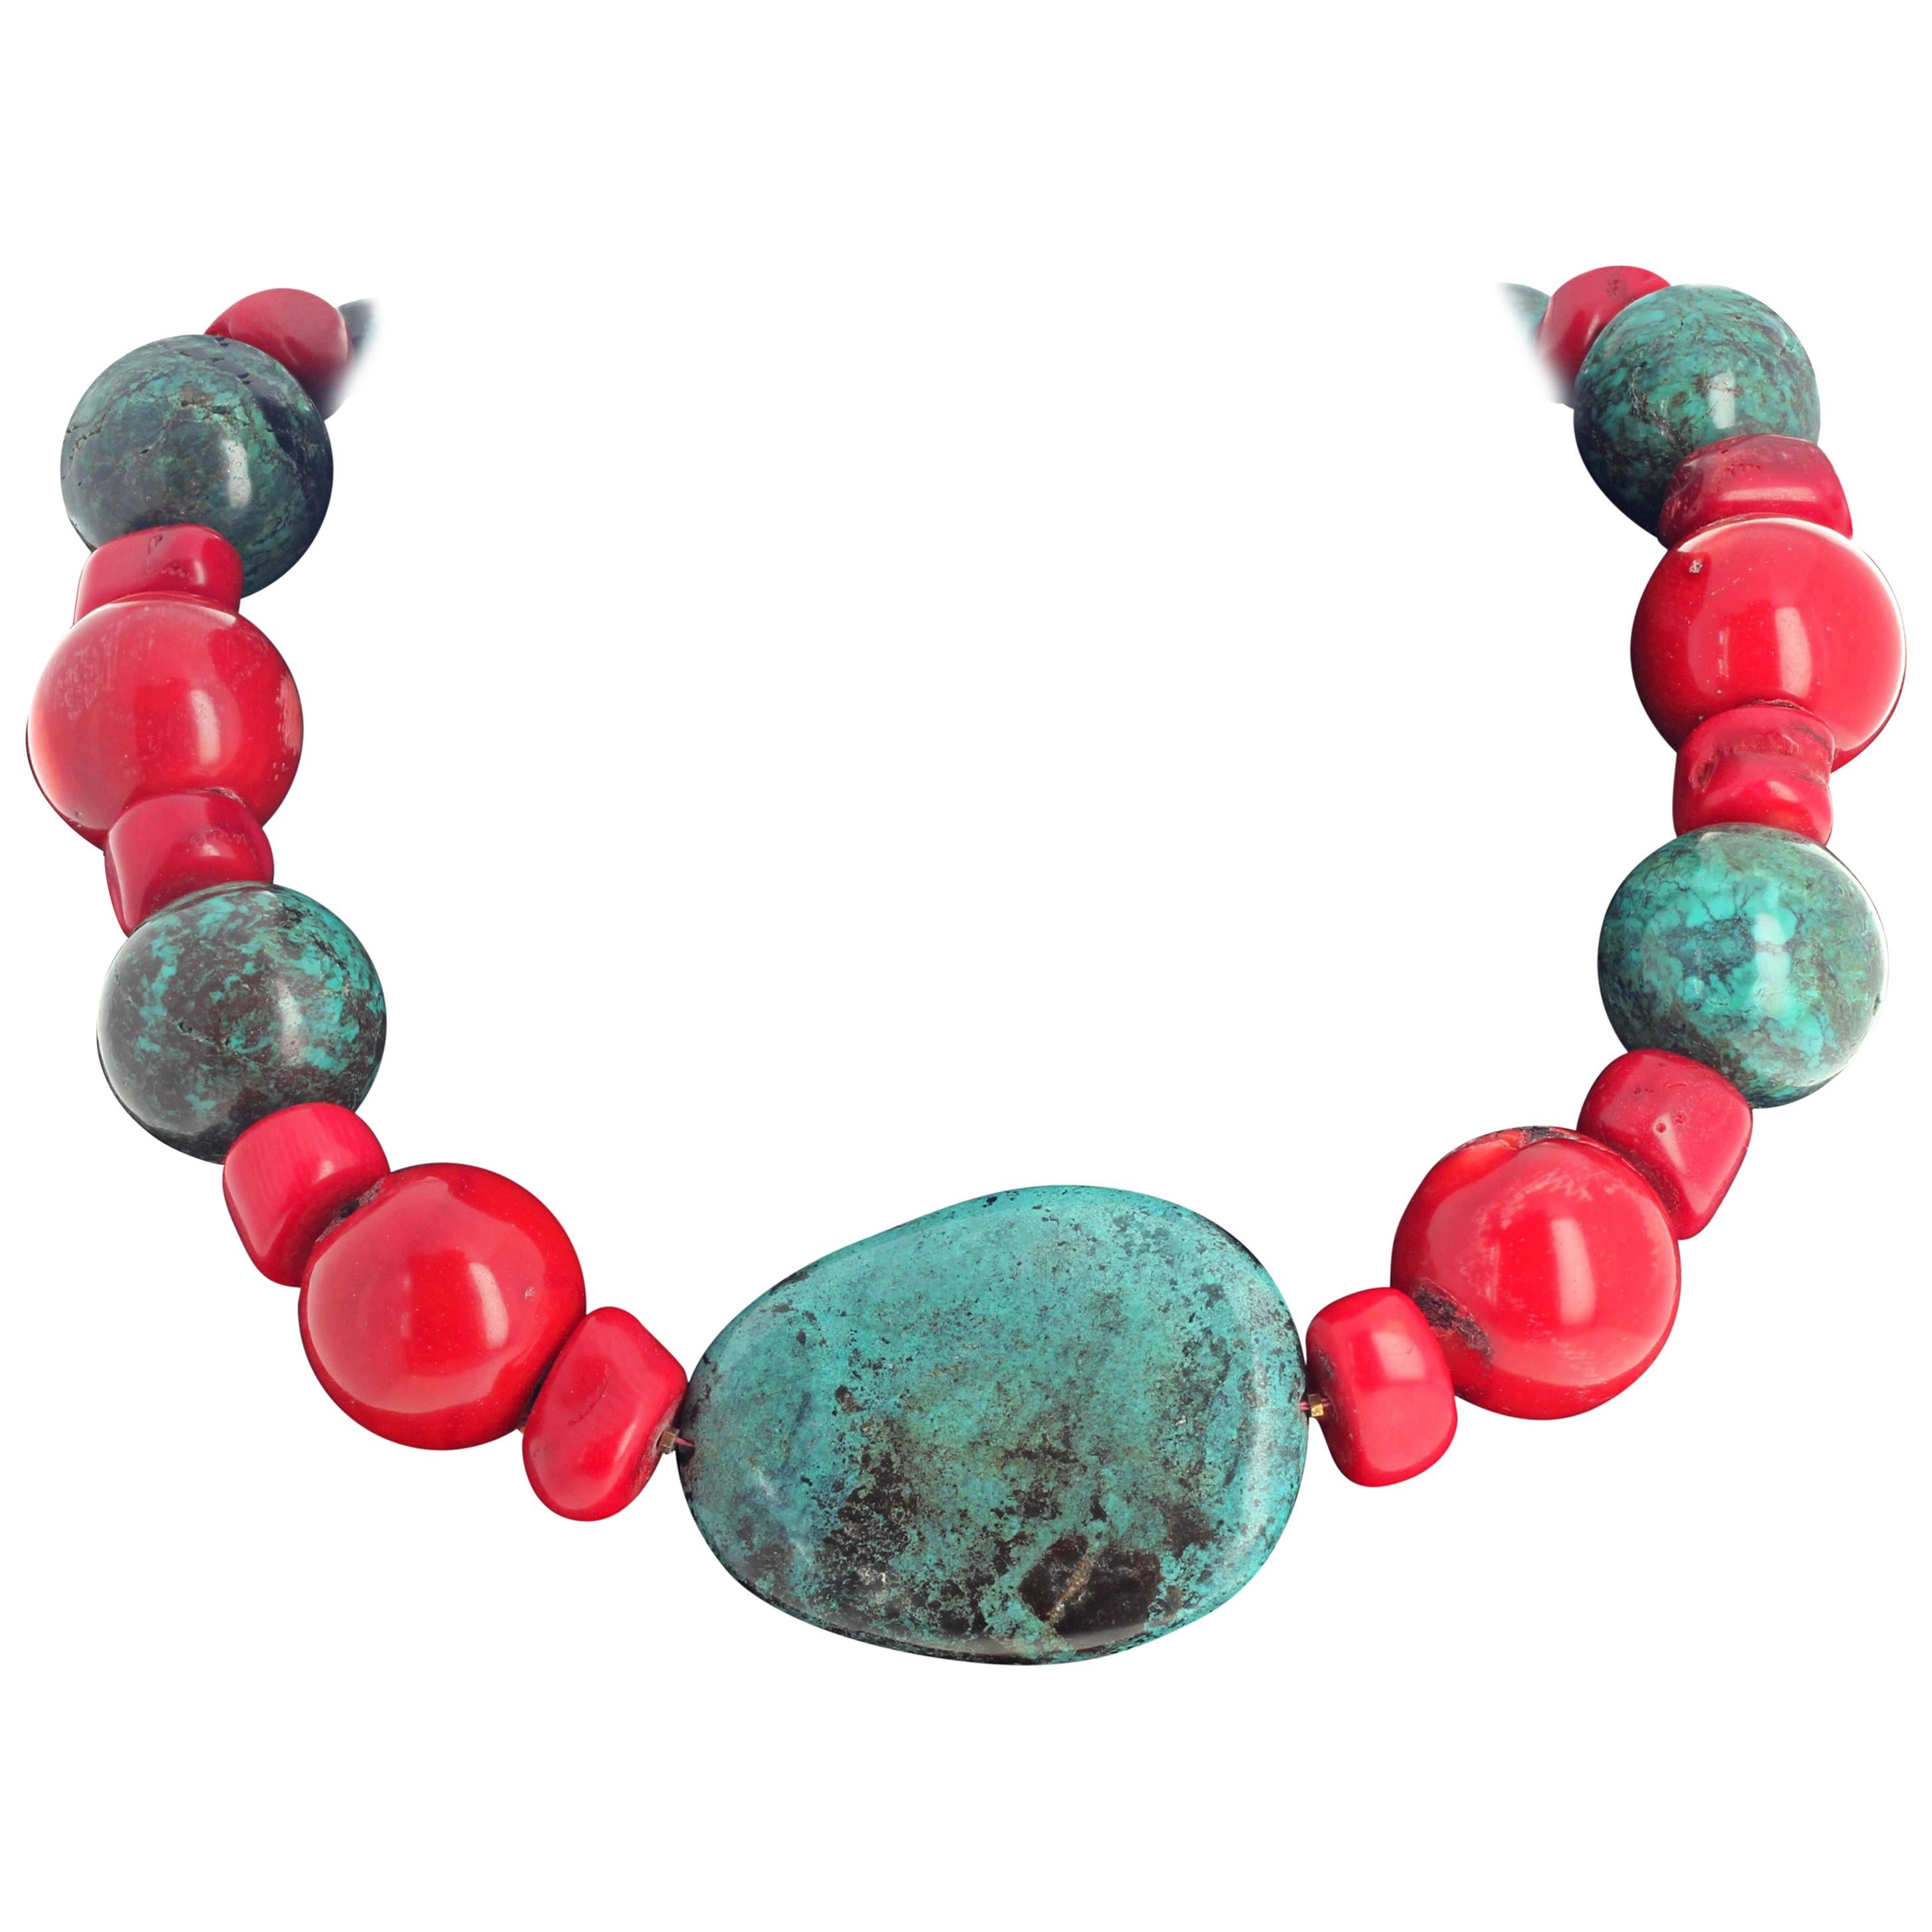 This natural highly polished Chinese Turquoise is enhanced with polished round and polished chunks of natural red Bamboo Coral in this beautiful 18 inch long necklace with gold plated clasp. 